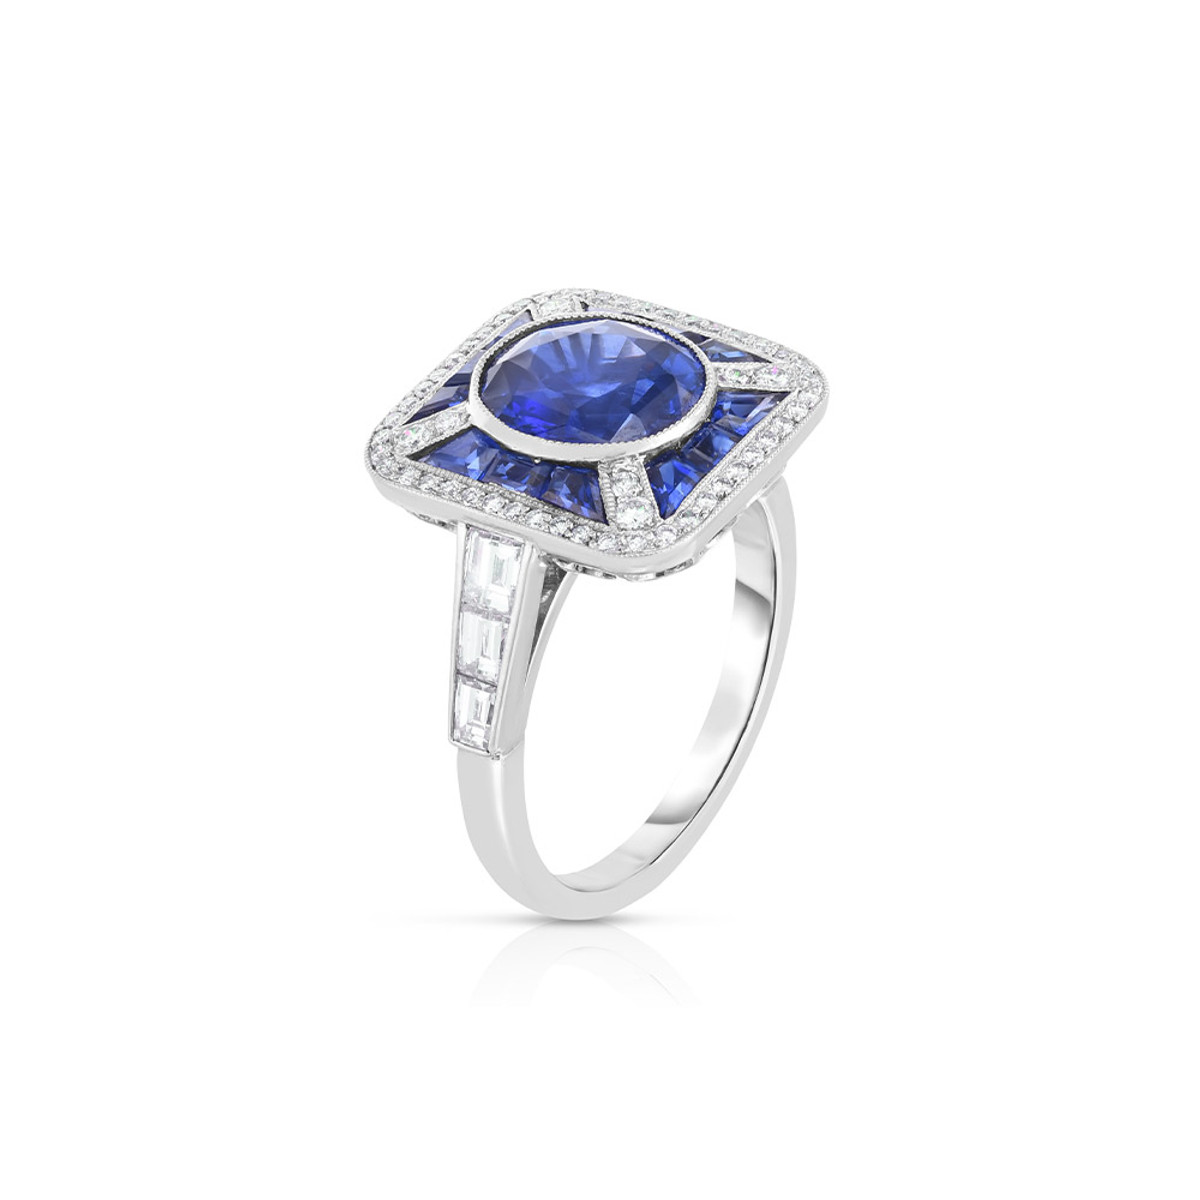 Hyde Park Collection Platinum Sapphire and Diamond Ring-61607 Product Image